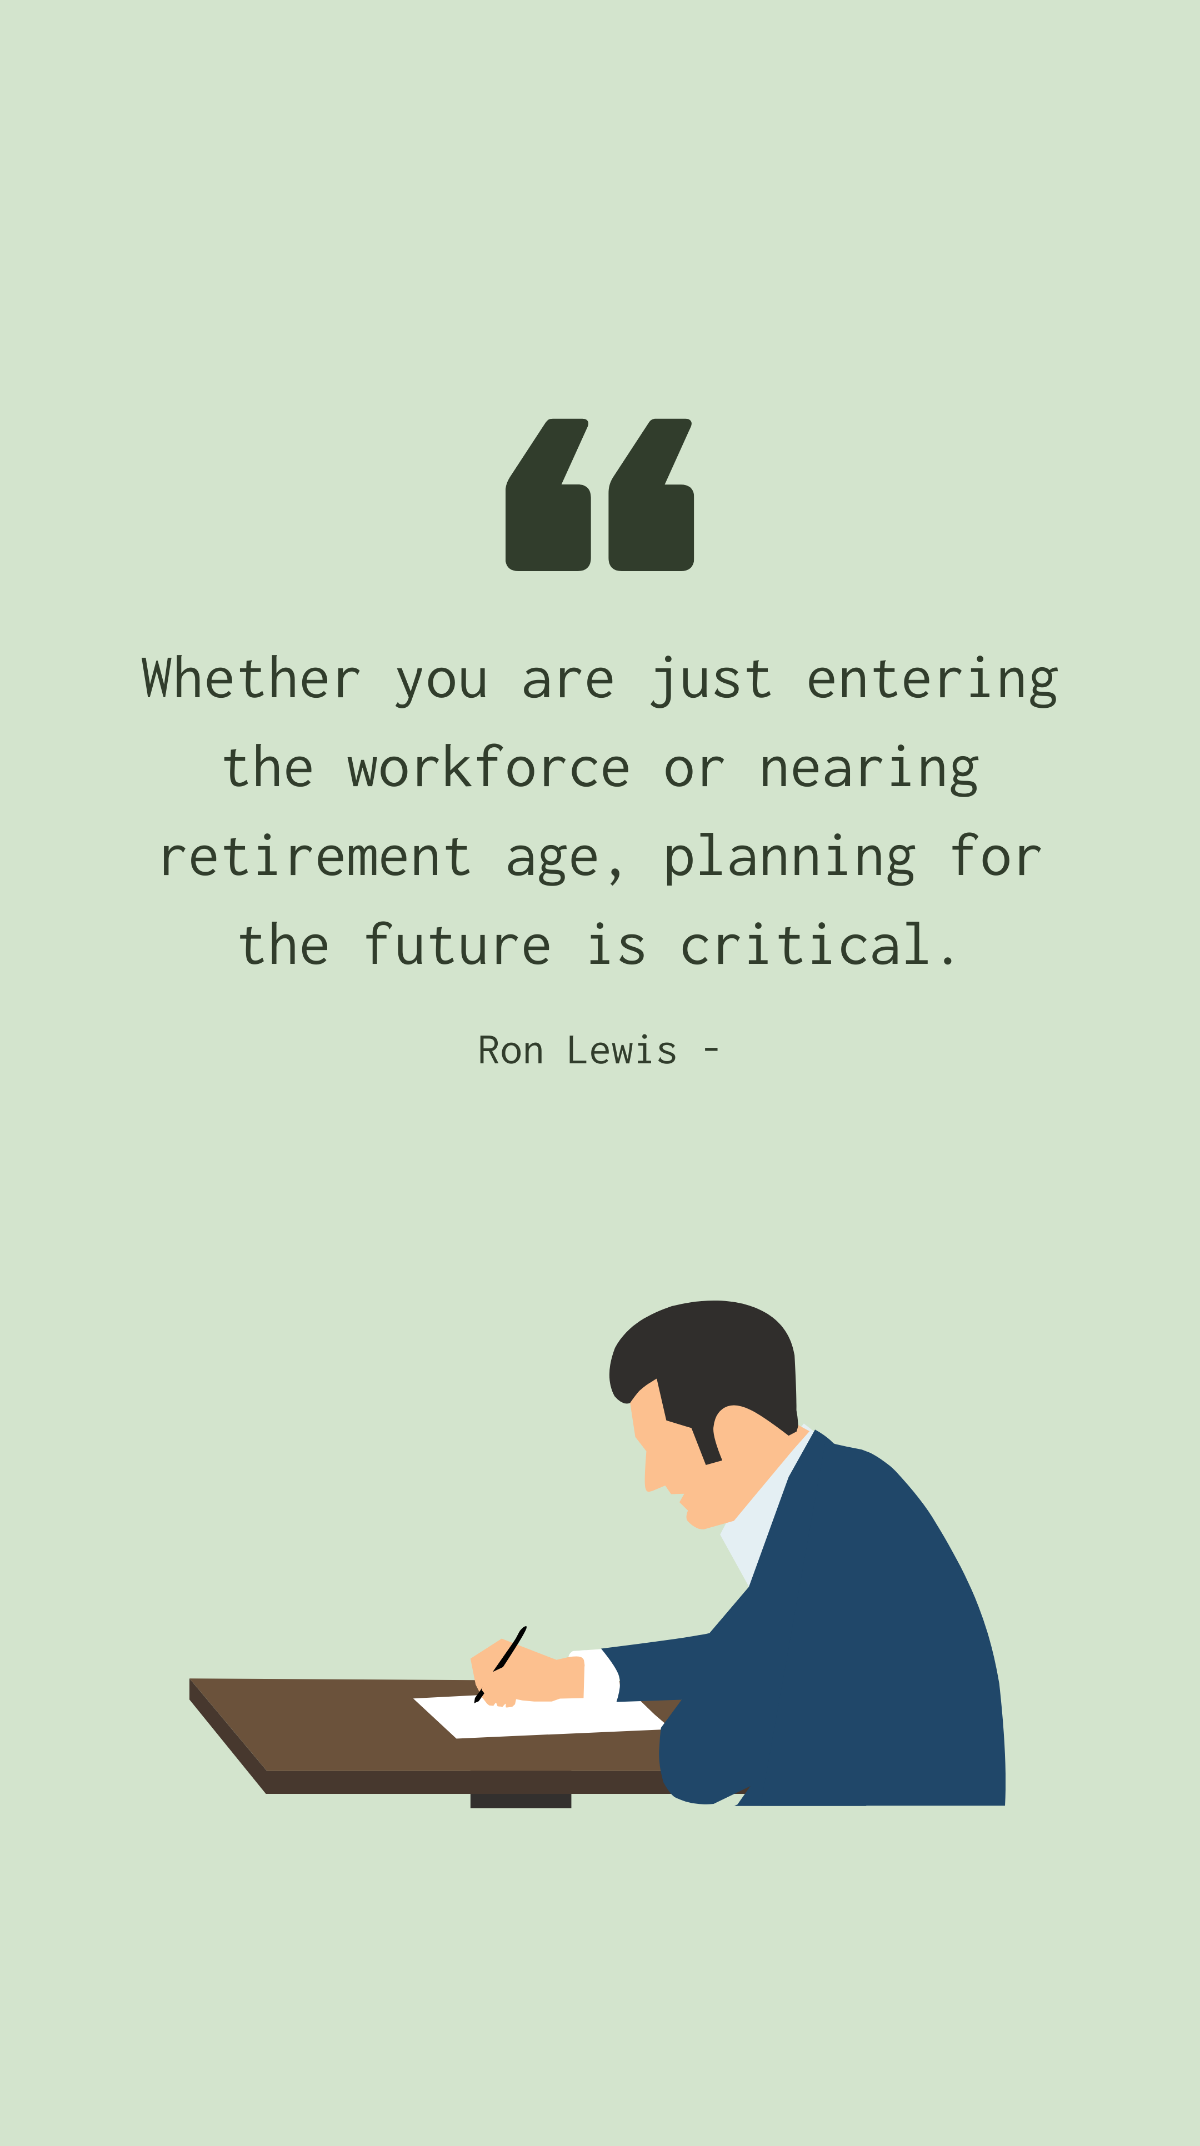 Ron Lewis - Whether you are just entering the workforce or nearing retirement age, planning for the future is critical. Template